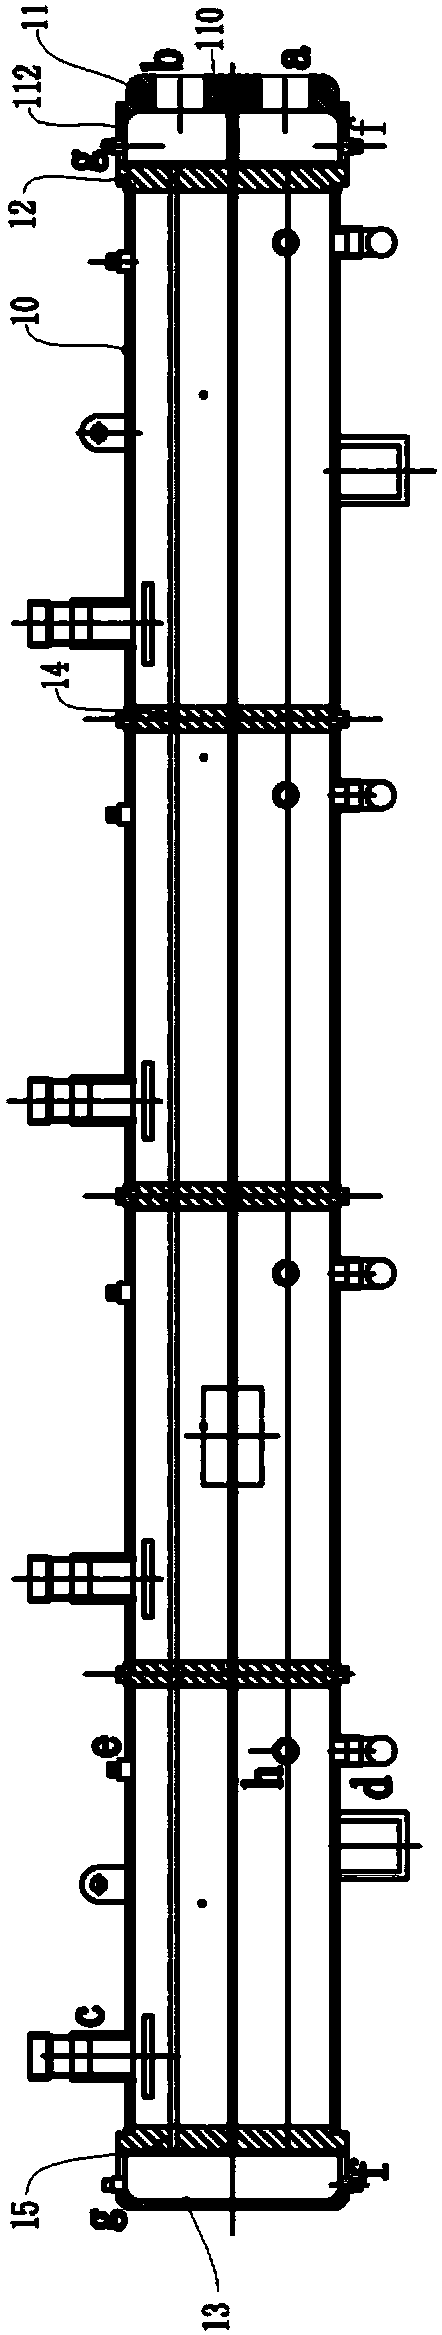 Copper pipe water channel double-space-plate refrigeration evaporator with multiple outer shell sections